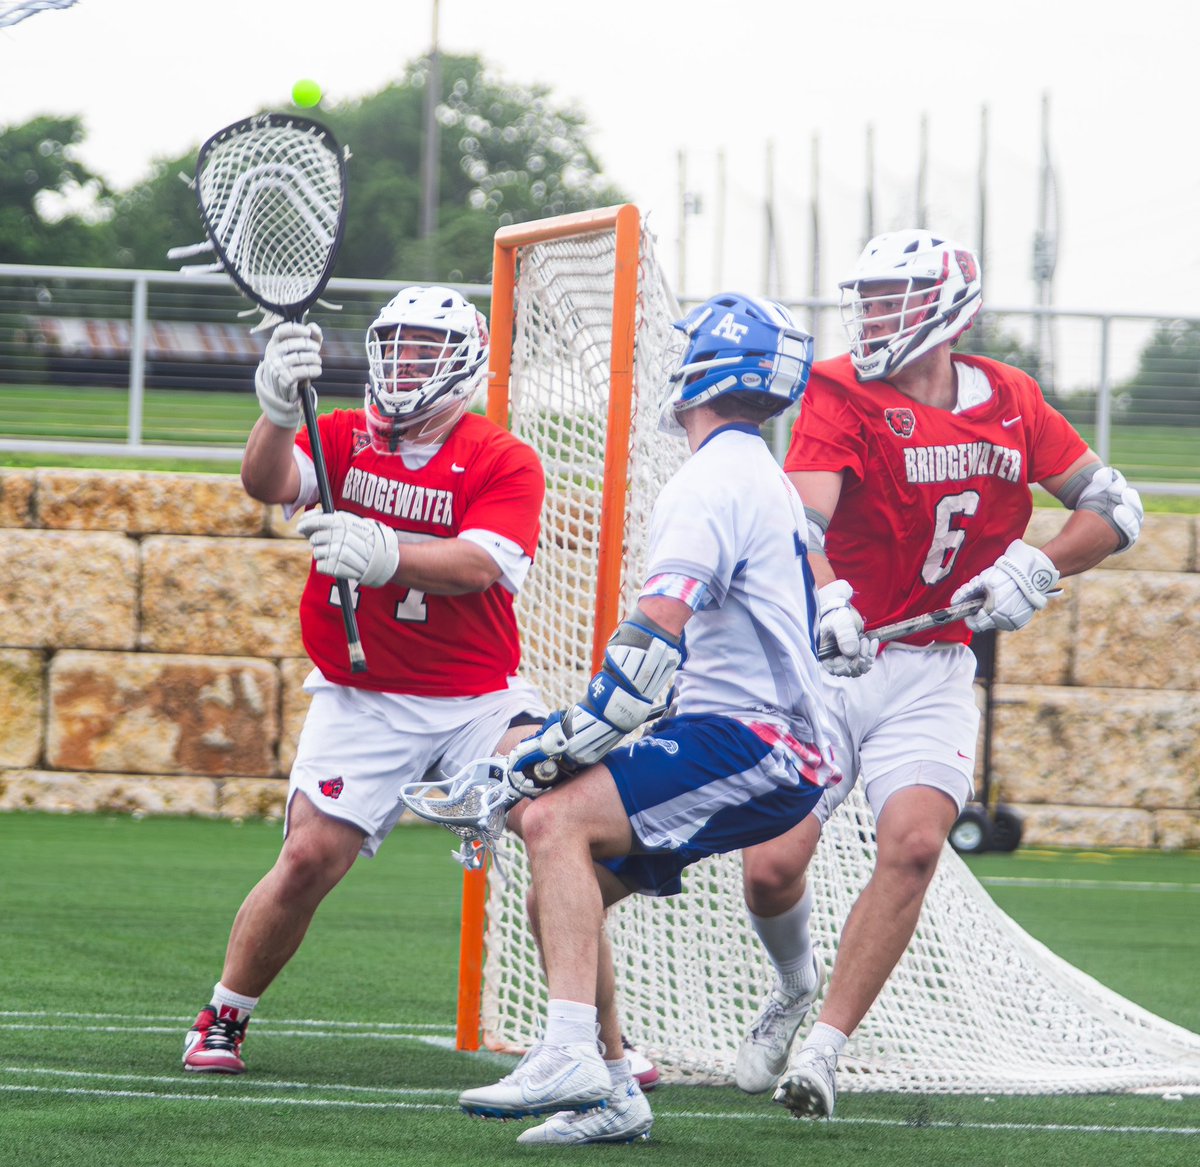 Some shots from the @BSULacrosse and @AFC_Lacrosse game yesterday @MCLA @MCLA_Tournament @VarsityLacrosse